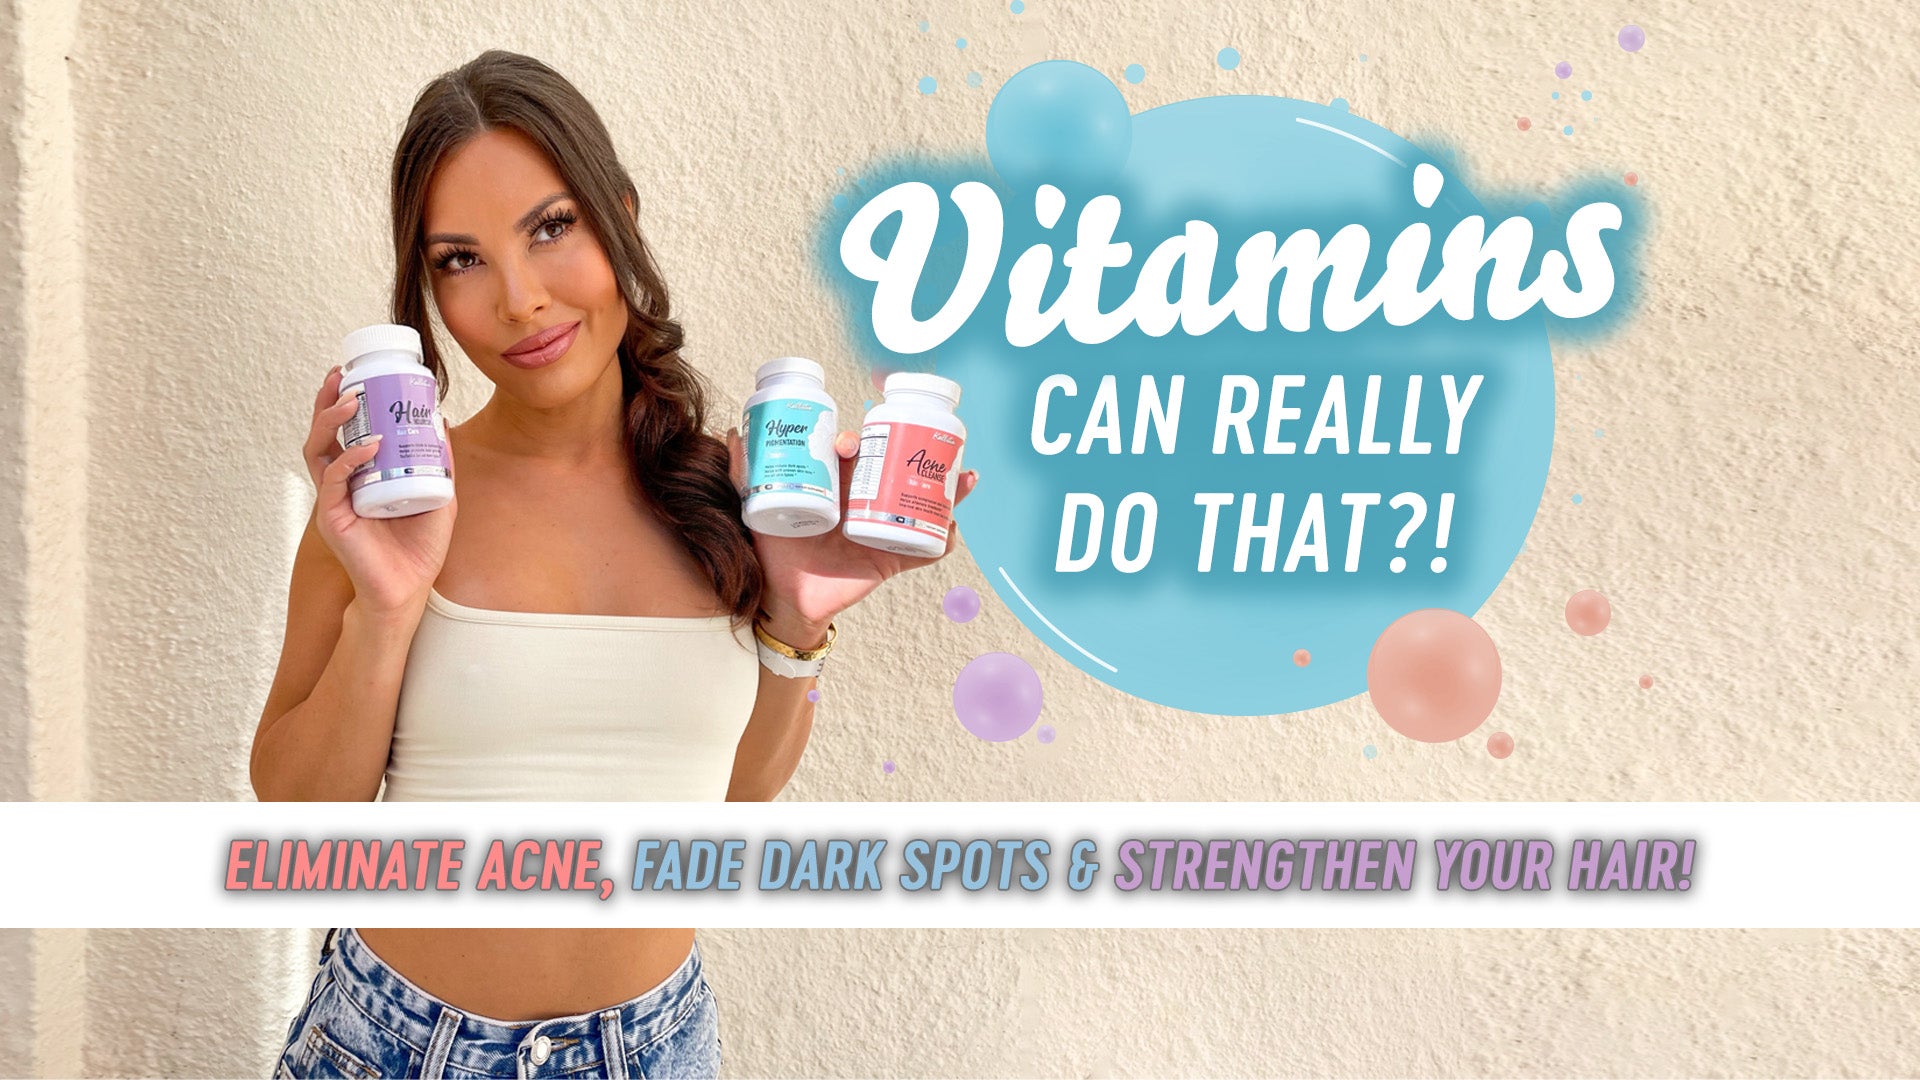 Vitamins can really do that?!